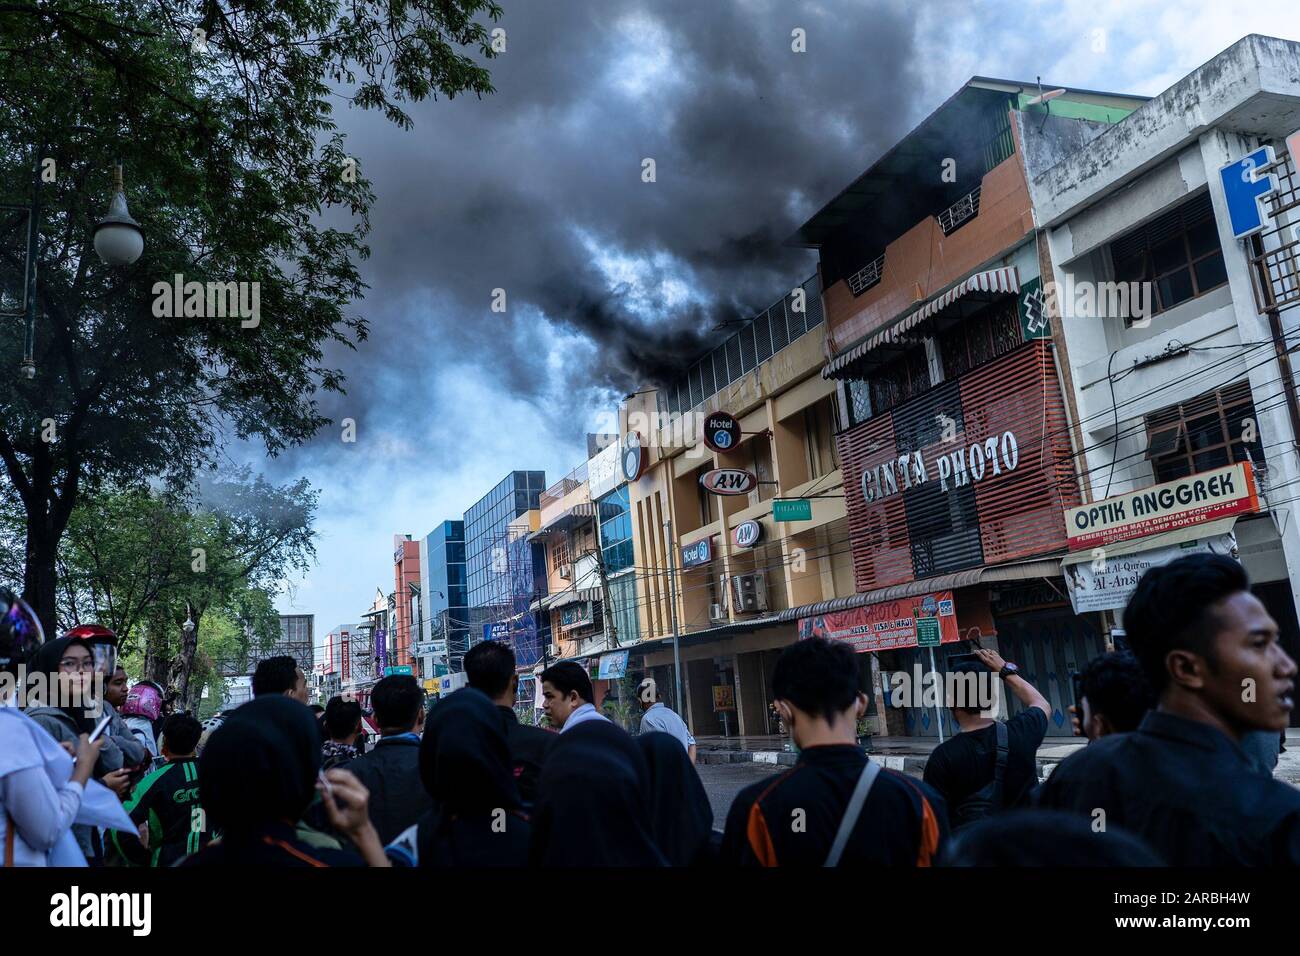 View Of A W Fast Foods Restaurant On Fire In Banda Aceh The Incident Allegedly Caused By Fire That Originated From A Warehouse Near A Fast Food Restaurant Stock Photo Alamy